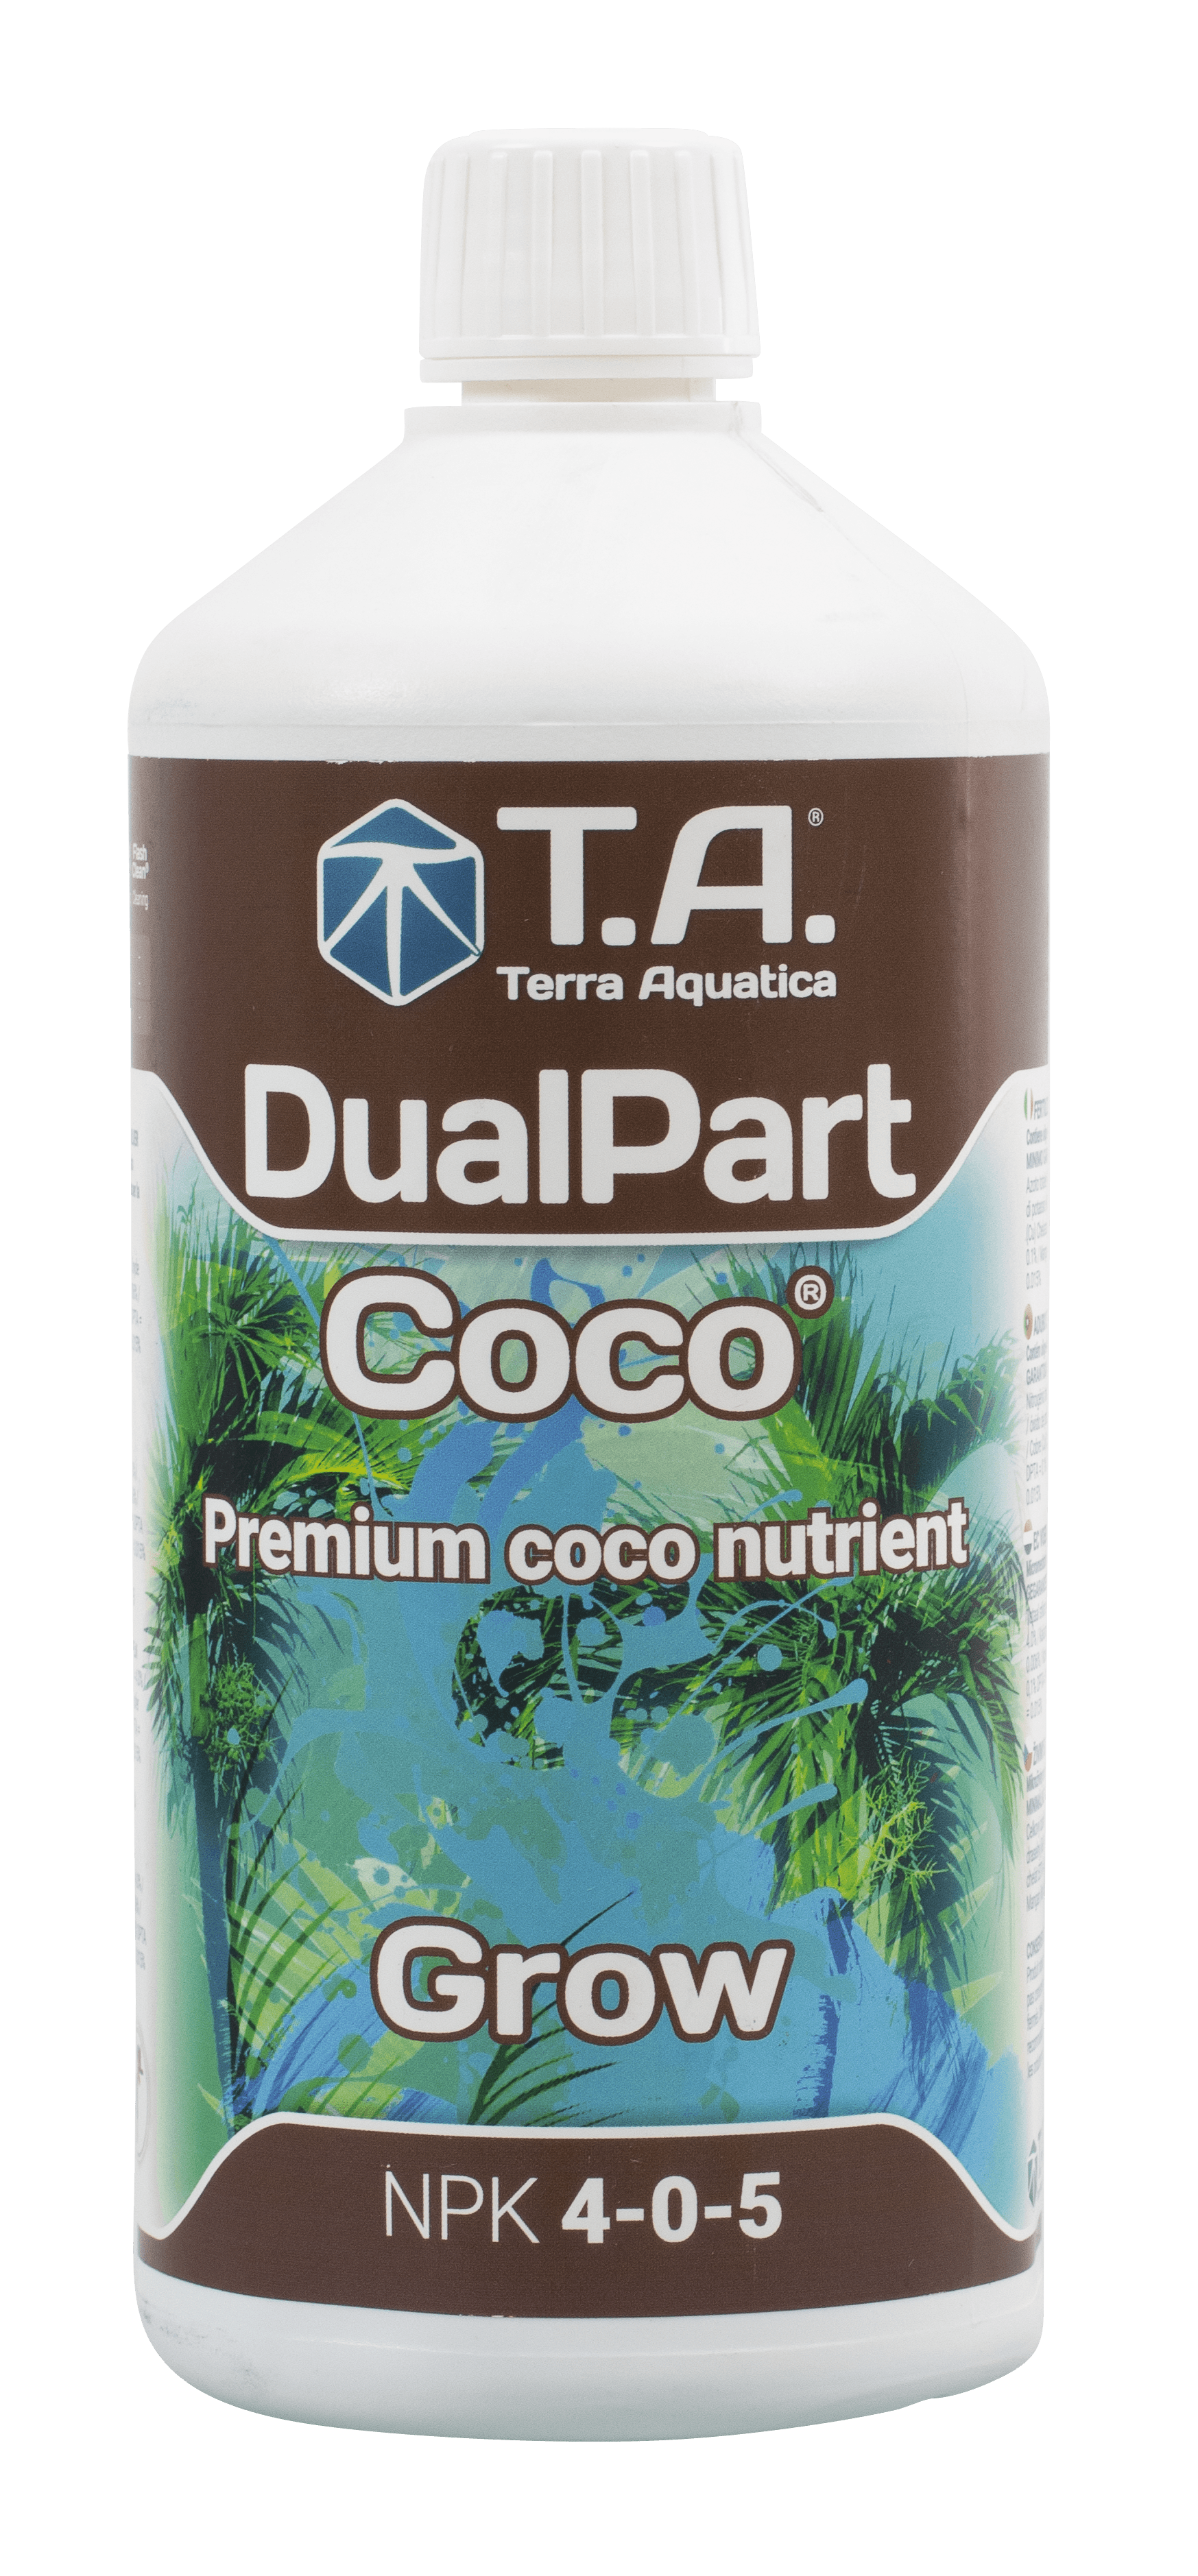 T. A. DualPart Coco Grow